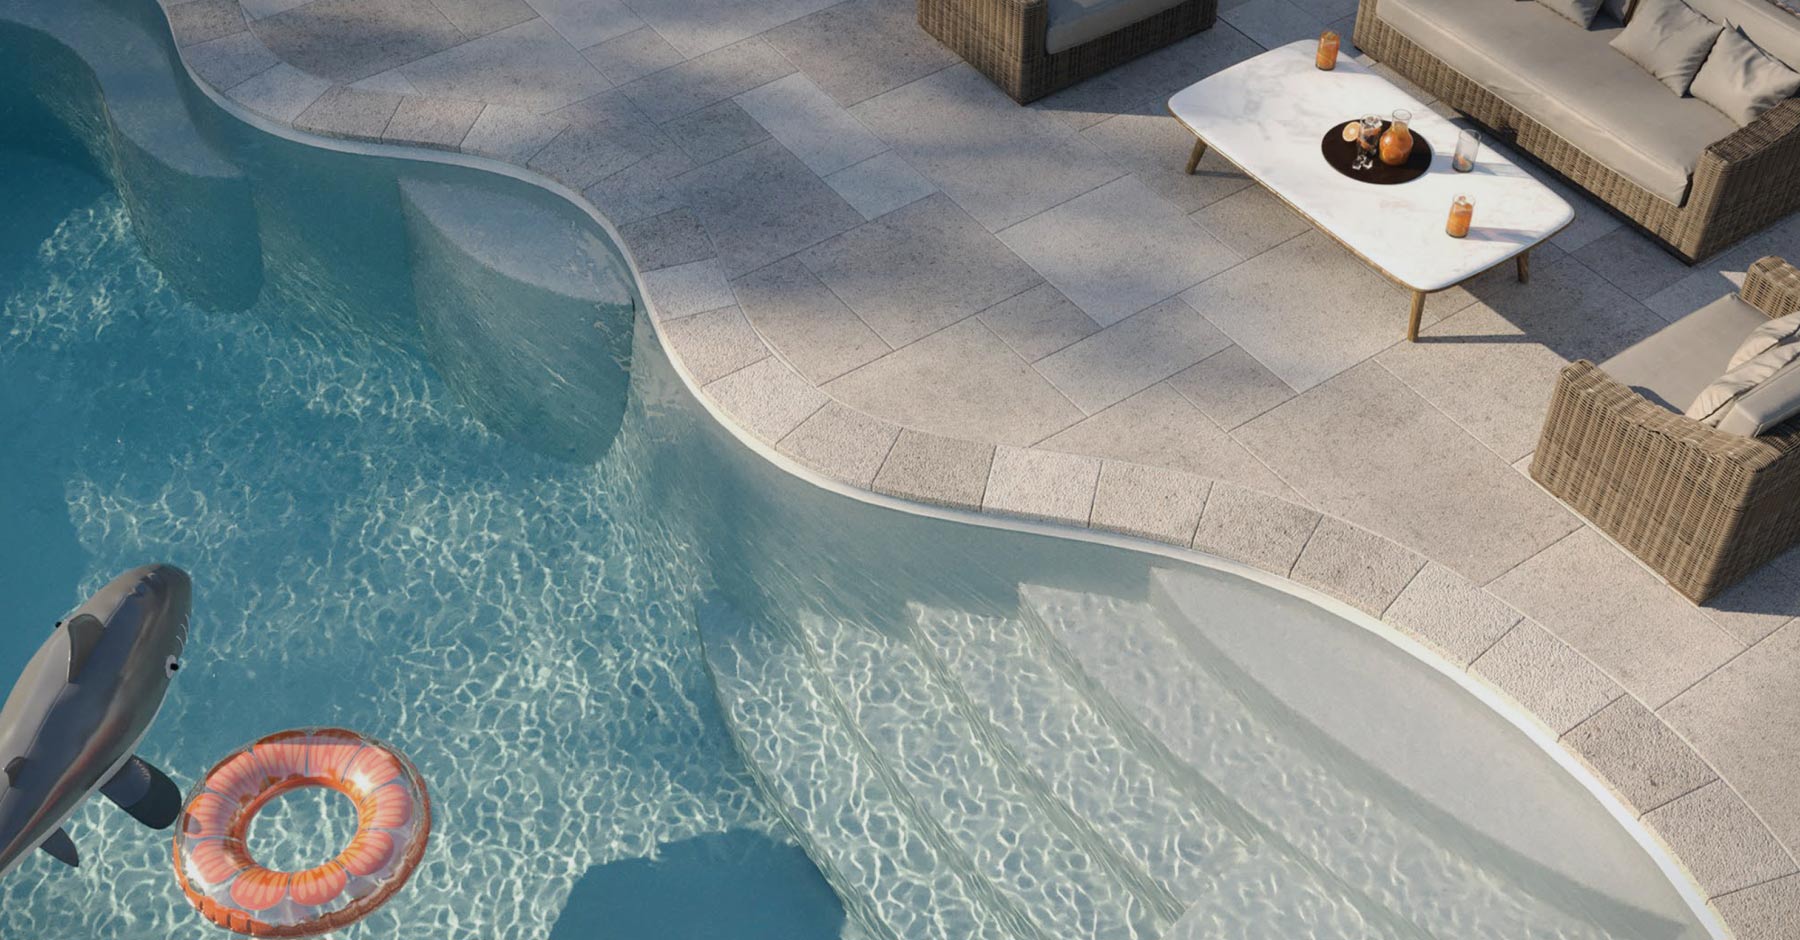 Our Poly Pools are the best in - Poly Pools Australia